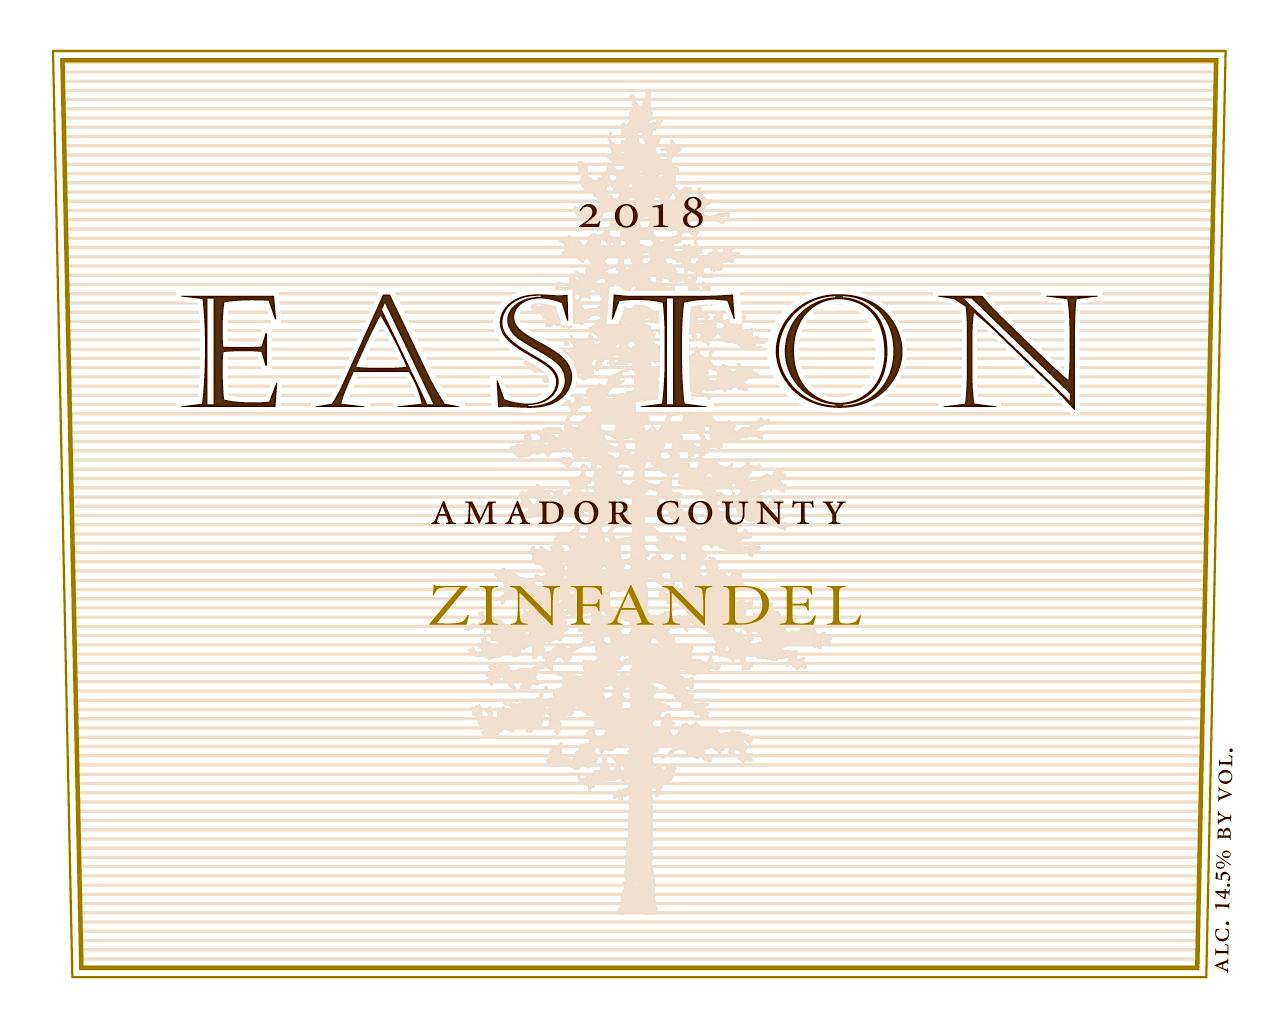 Label for Easton